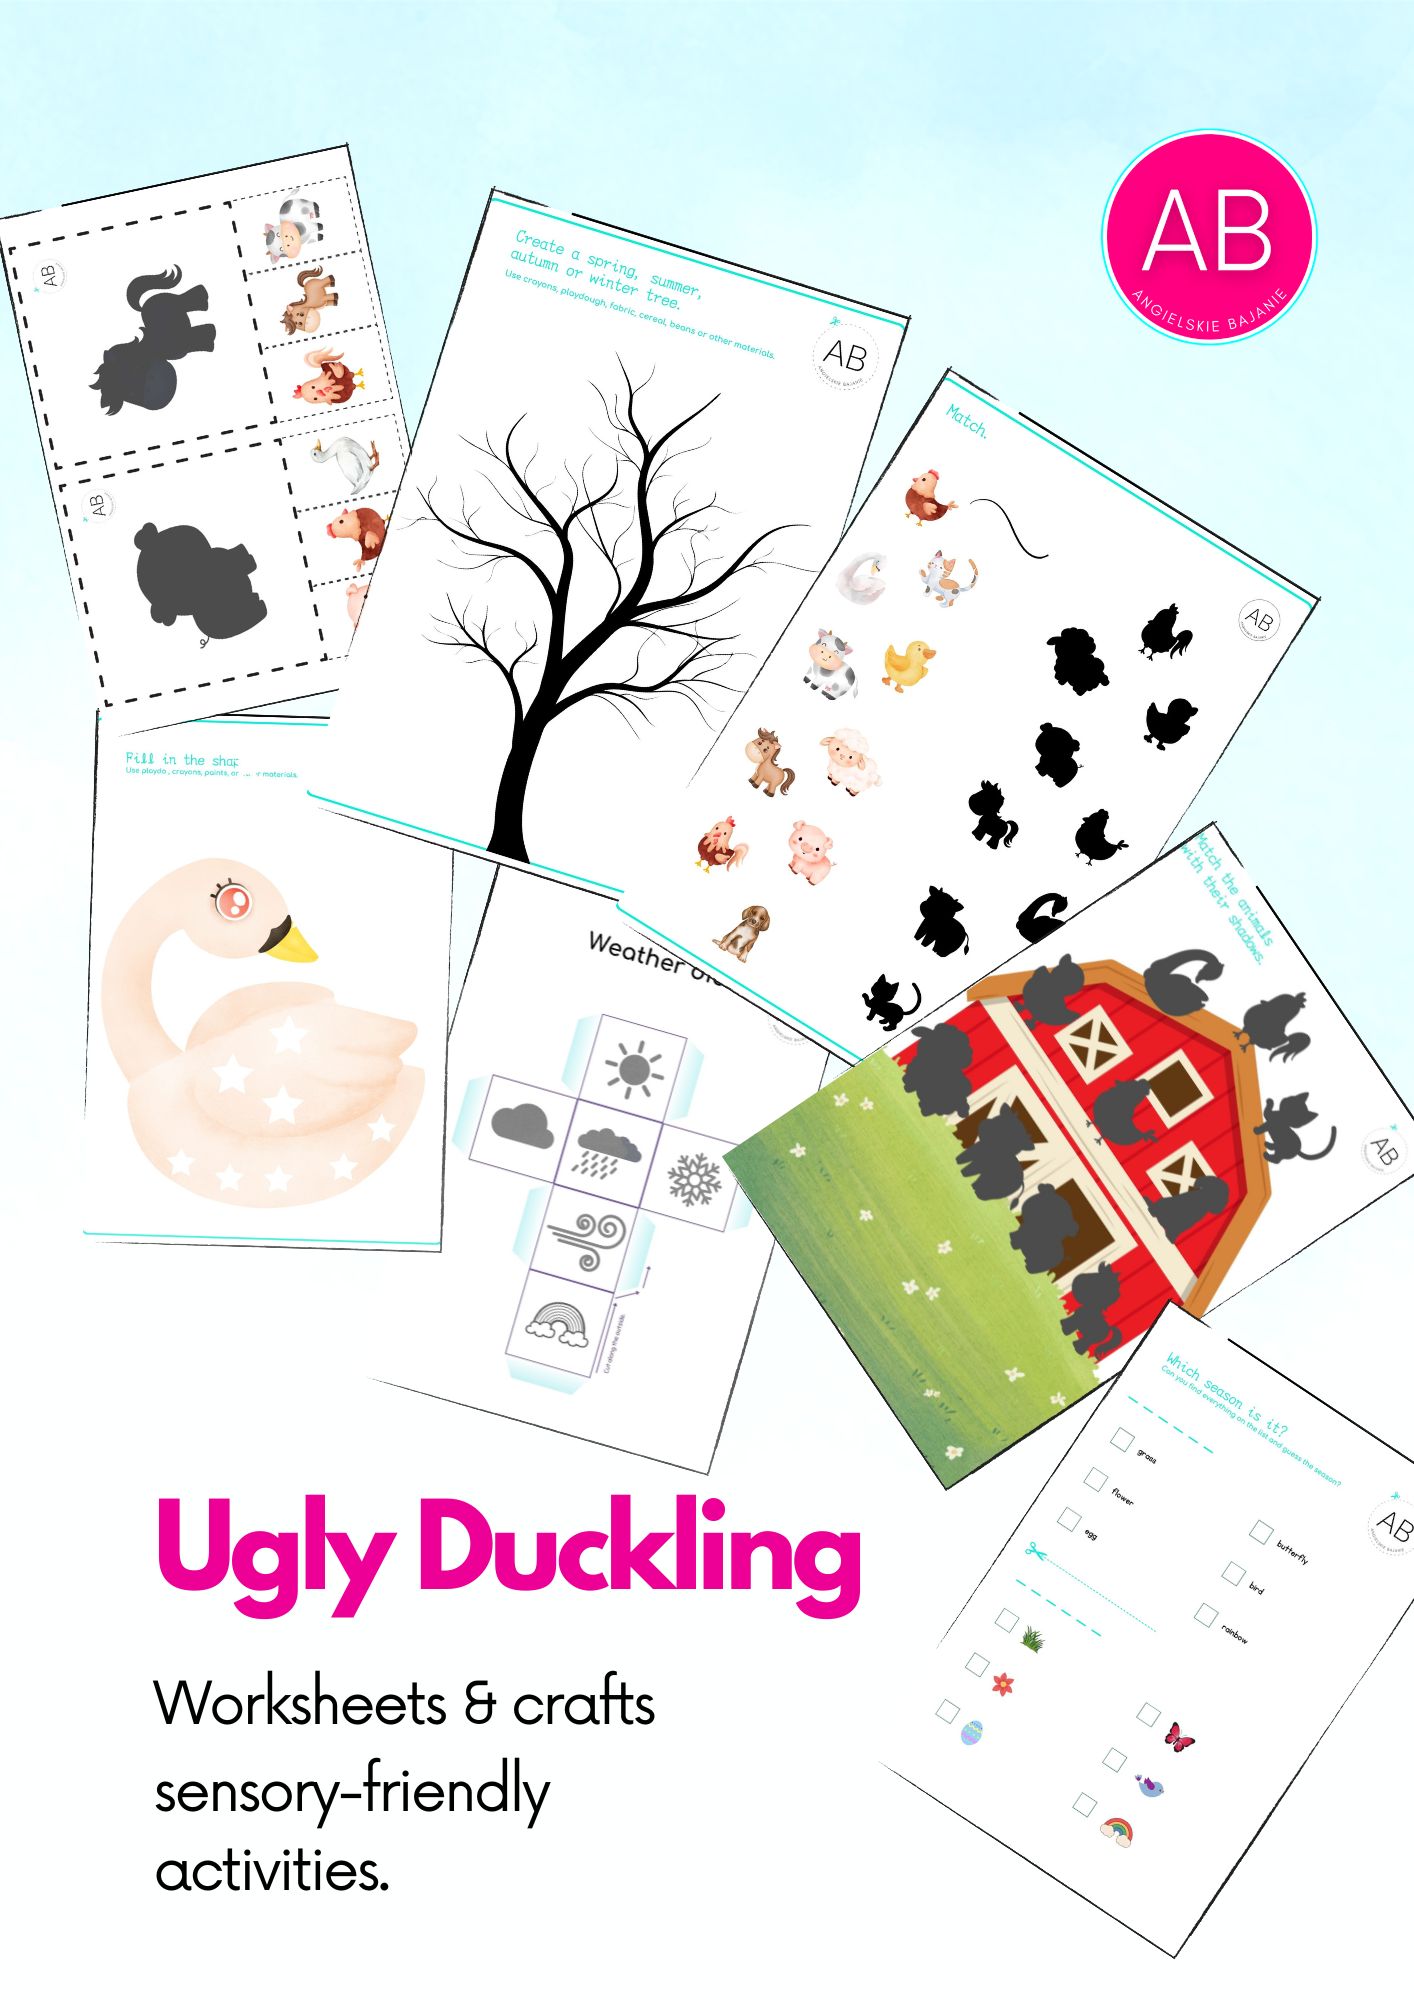 Ugly duckling printable